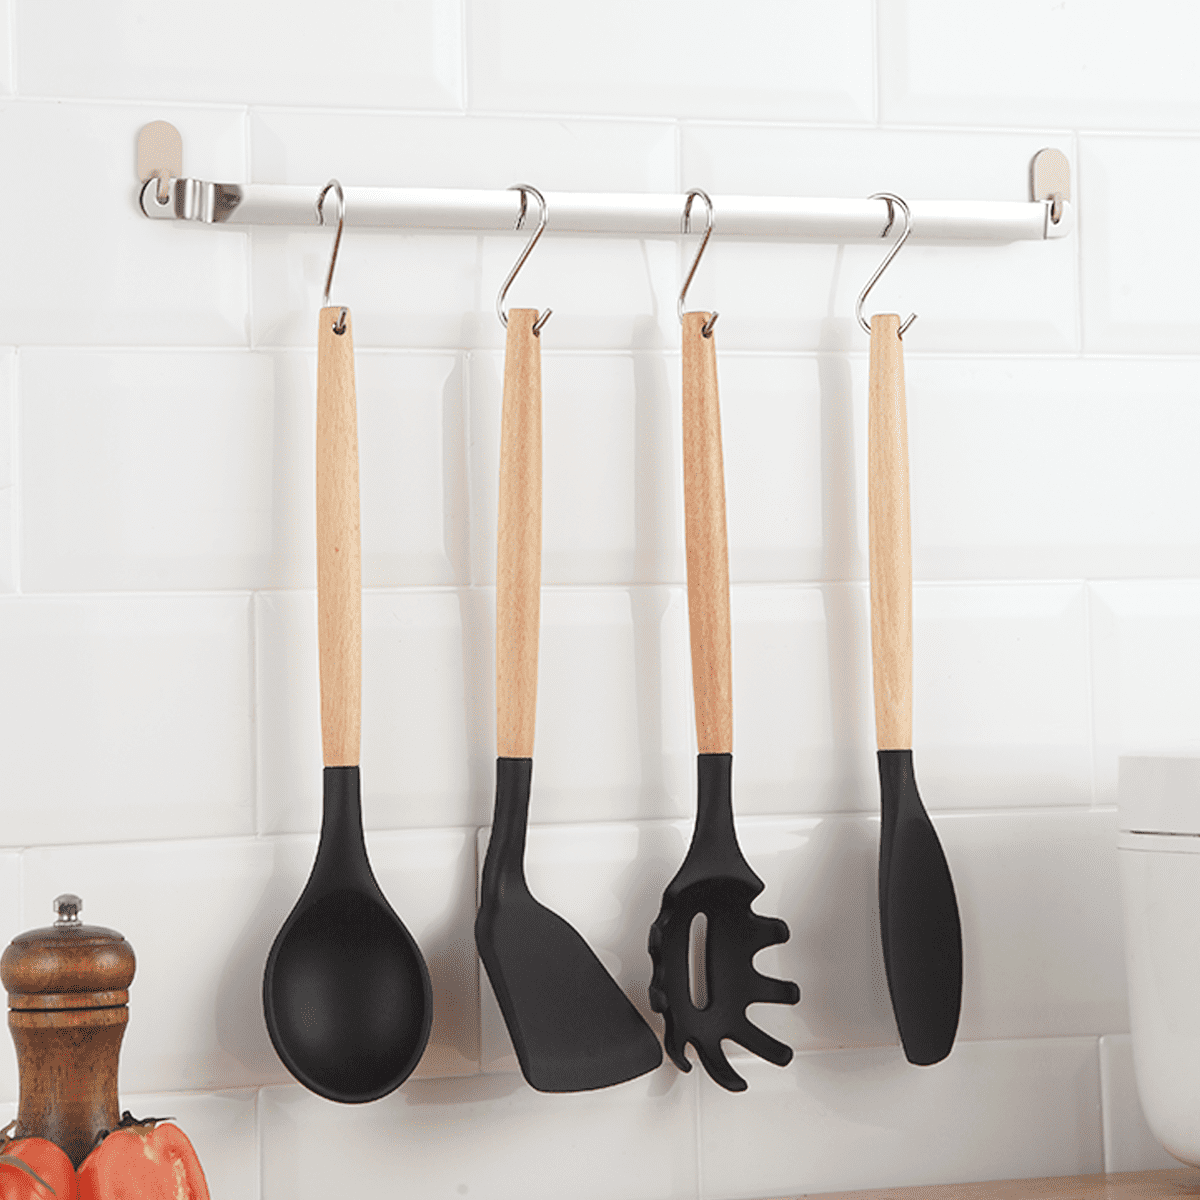 ReaNea Rainbow Handle Kitchen Utensils Set 37 Pieces, Stainless Steel  Cooking Utensils Set, Kitchen Gadgets with Hooks For Hanging. 